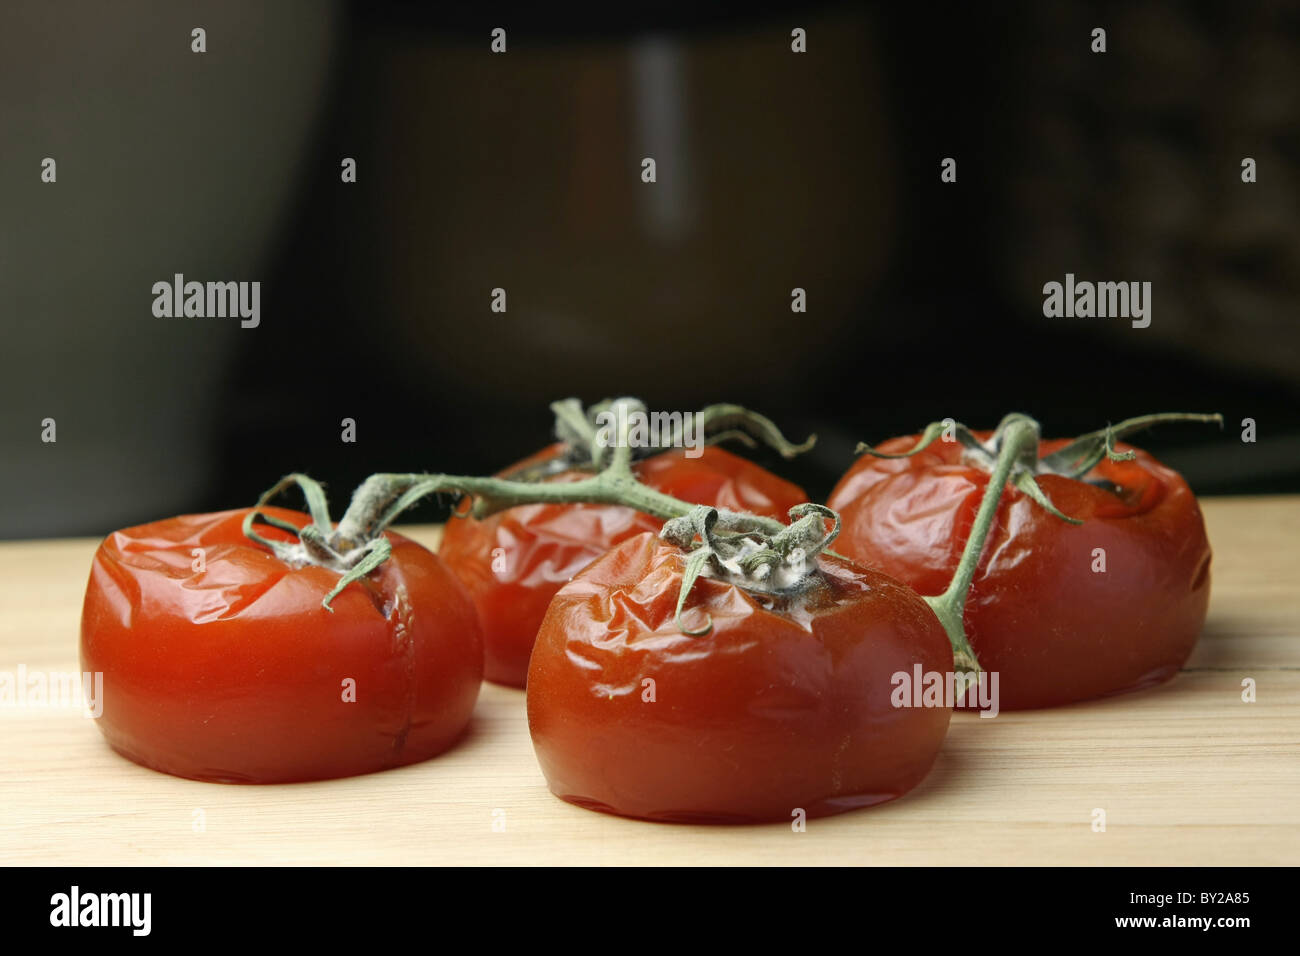 https://c8.alamy.com/comp/BY2A85/four-rotting-tomatoes-BY2A85.jpg